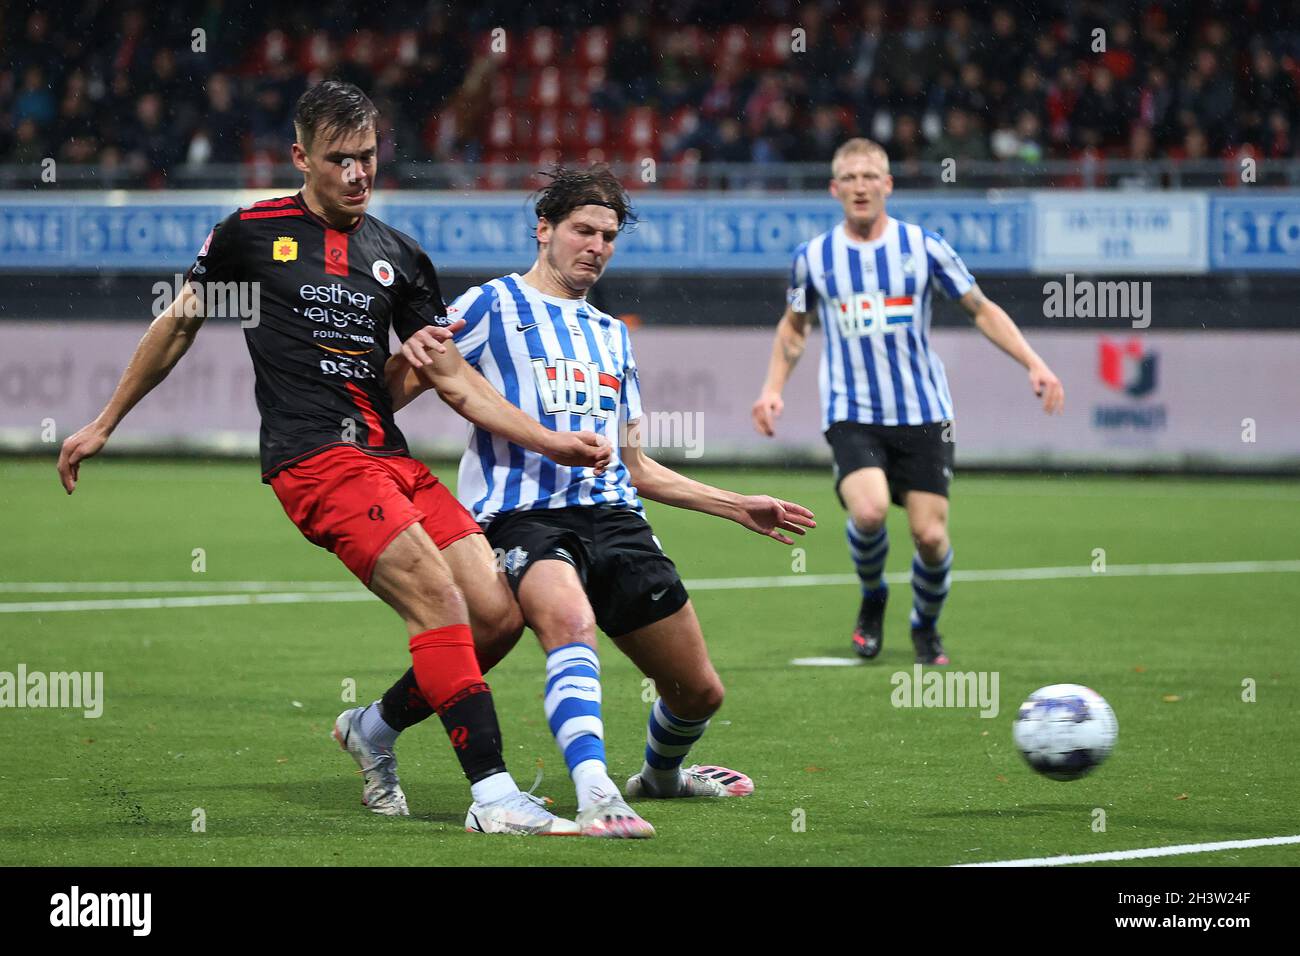 ROTTERDAM, NETHERLANDS - OCTOBER 30: 2-3 from Thijs Dallinga of Excelsior Rotterdam during the Dutch Keukenkampioendivisie match between SBV Excelsior and Fc Eindhoven at Van Donge & De Roo Stadion on October 30, 2021 in Rotterdam, Netherlands (Photo by Herman Dingler/Orange Pictures) Stock Photo